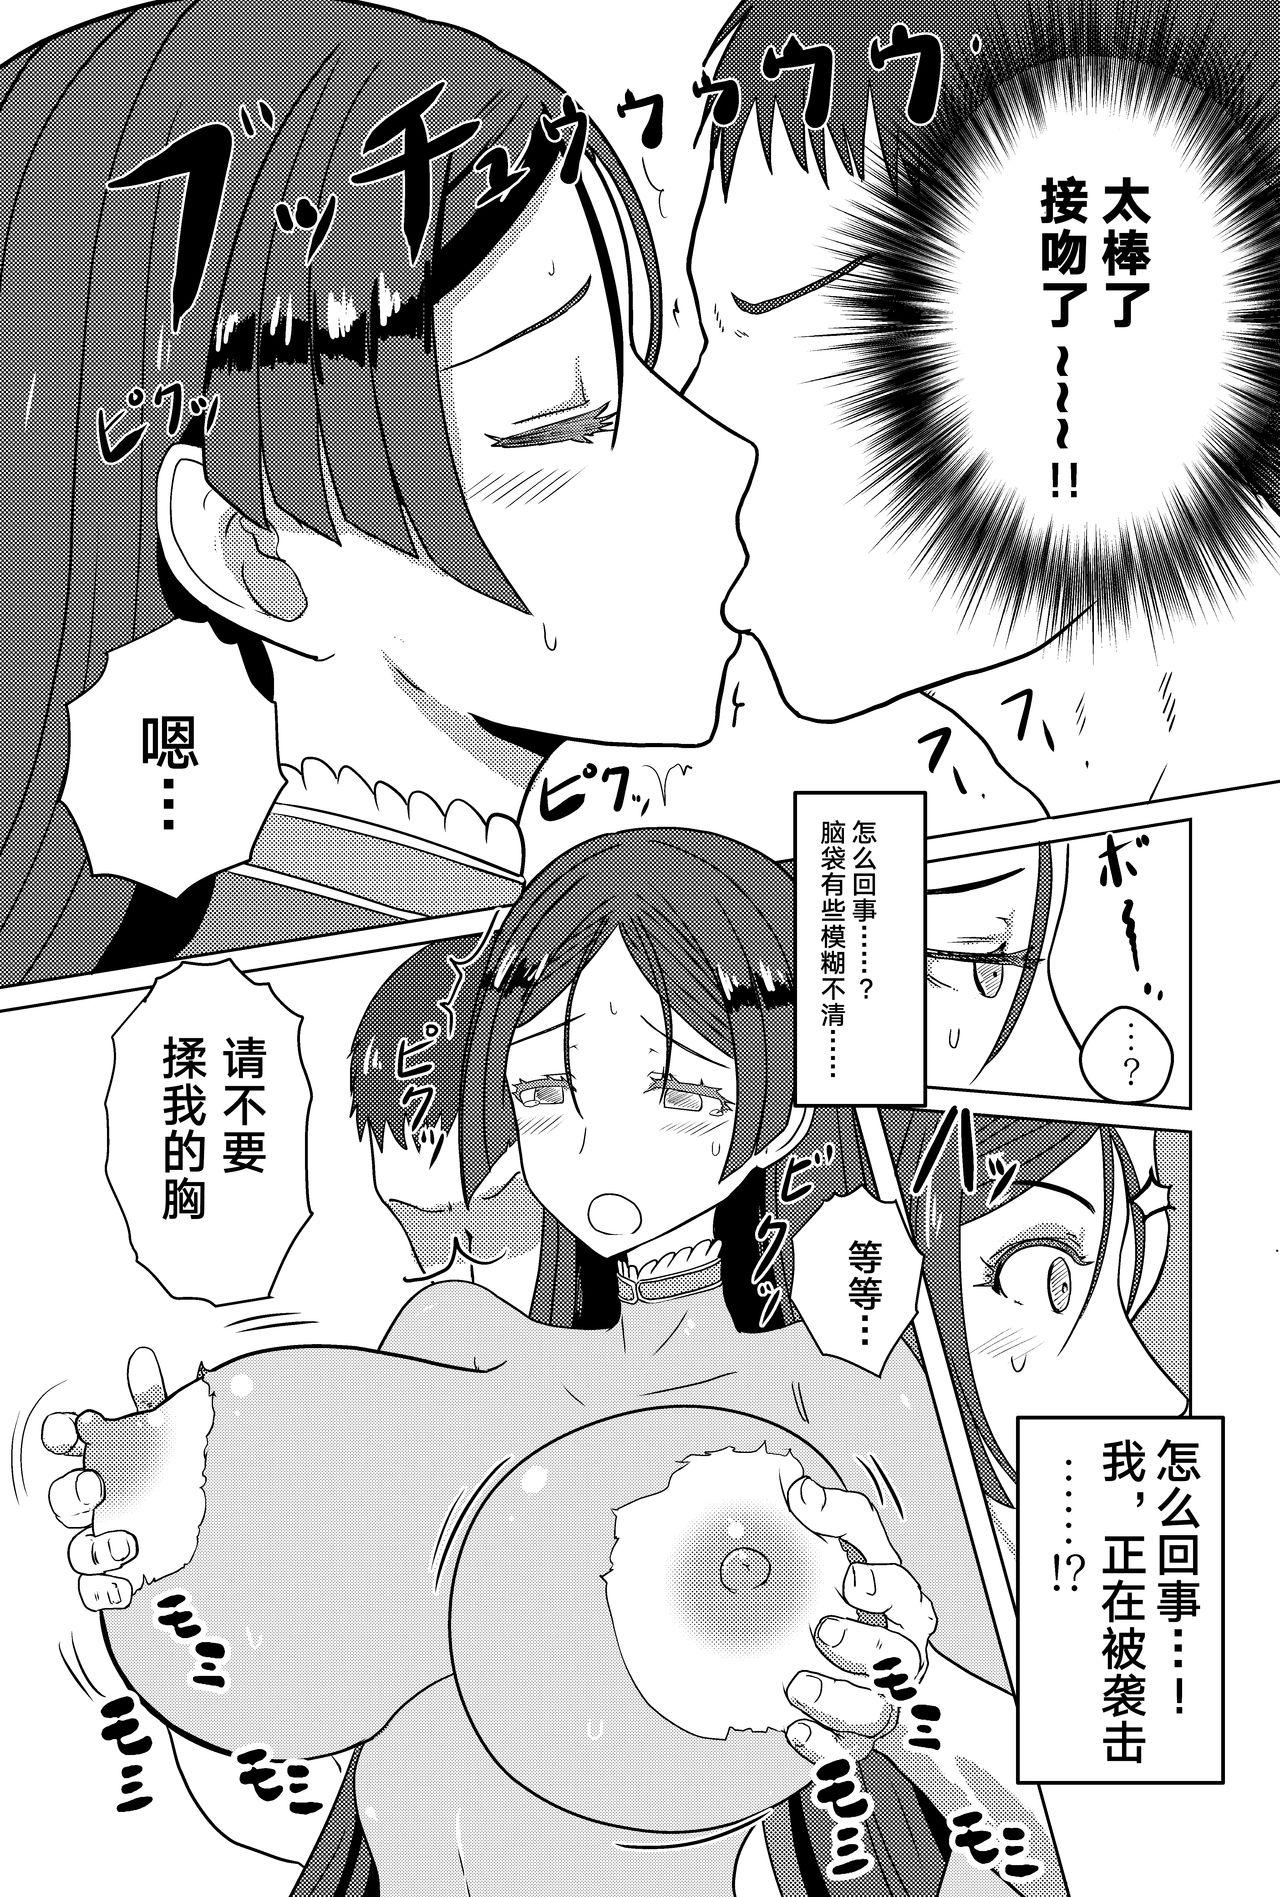 Huge Boobs 頼光ママとえっちする本 - Fate grand order Duro - Page 5